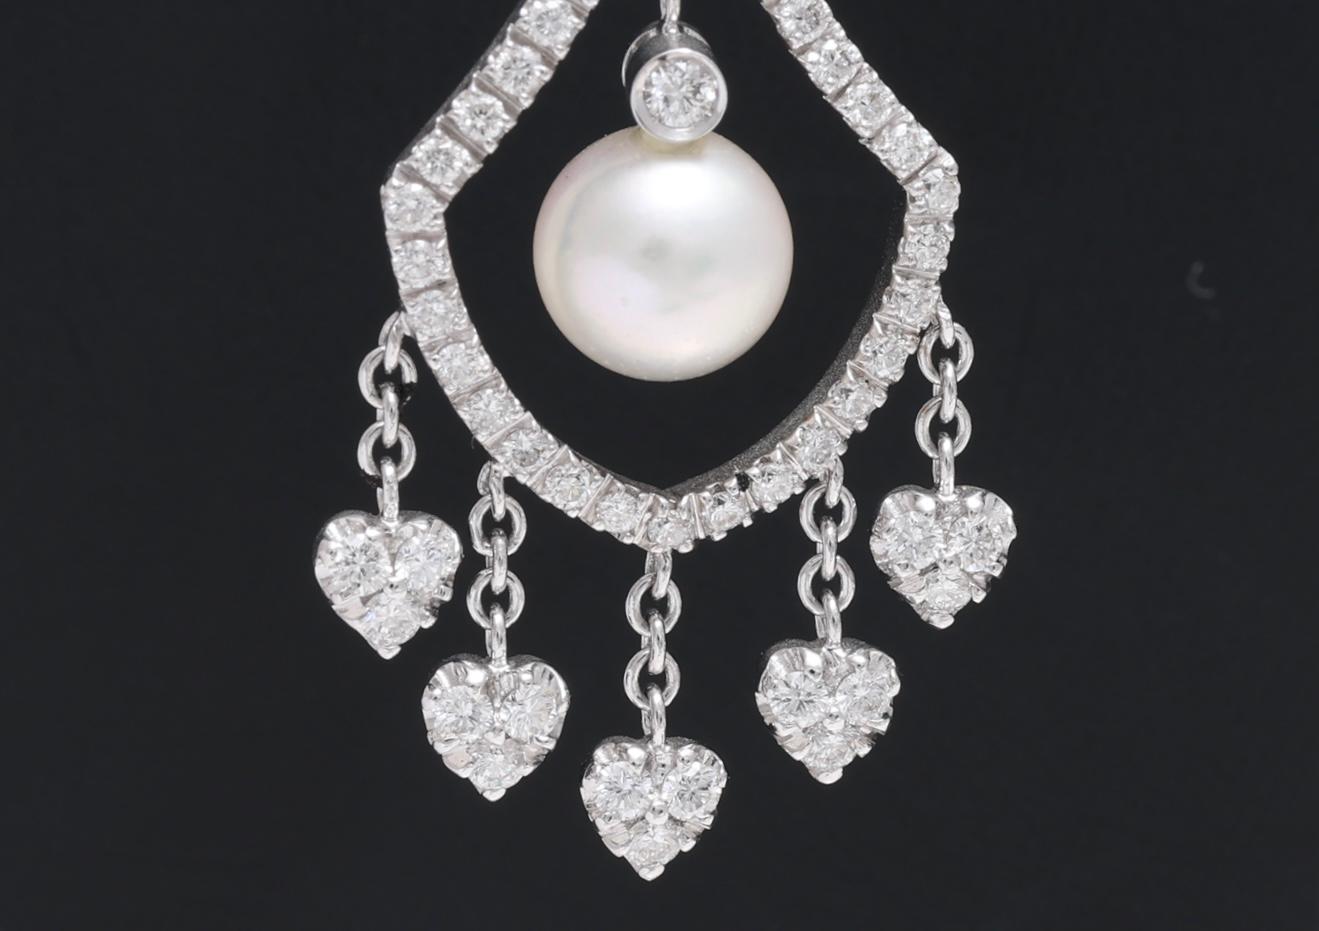 18 kt. white Gold Chandelier / Dangle Earrings With Pearls and 2.47 ct. Diamonds For Sale 1